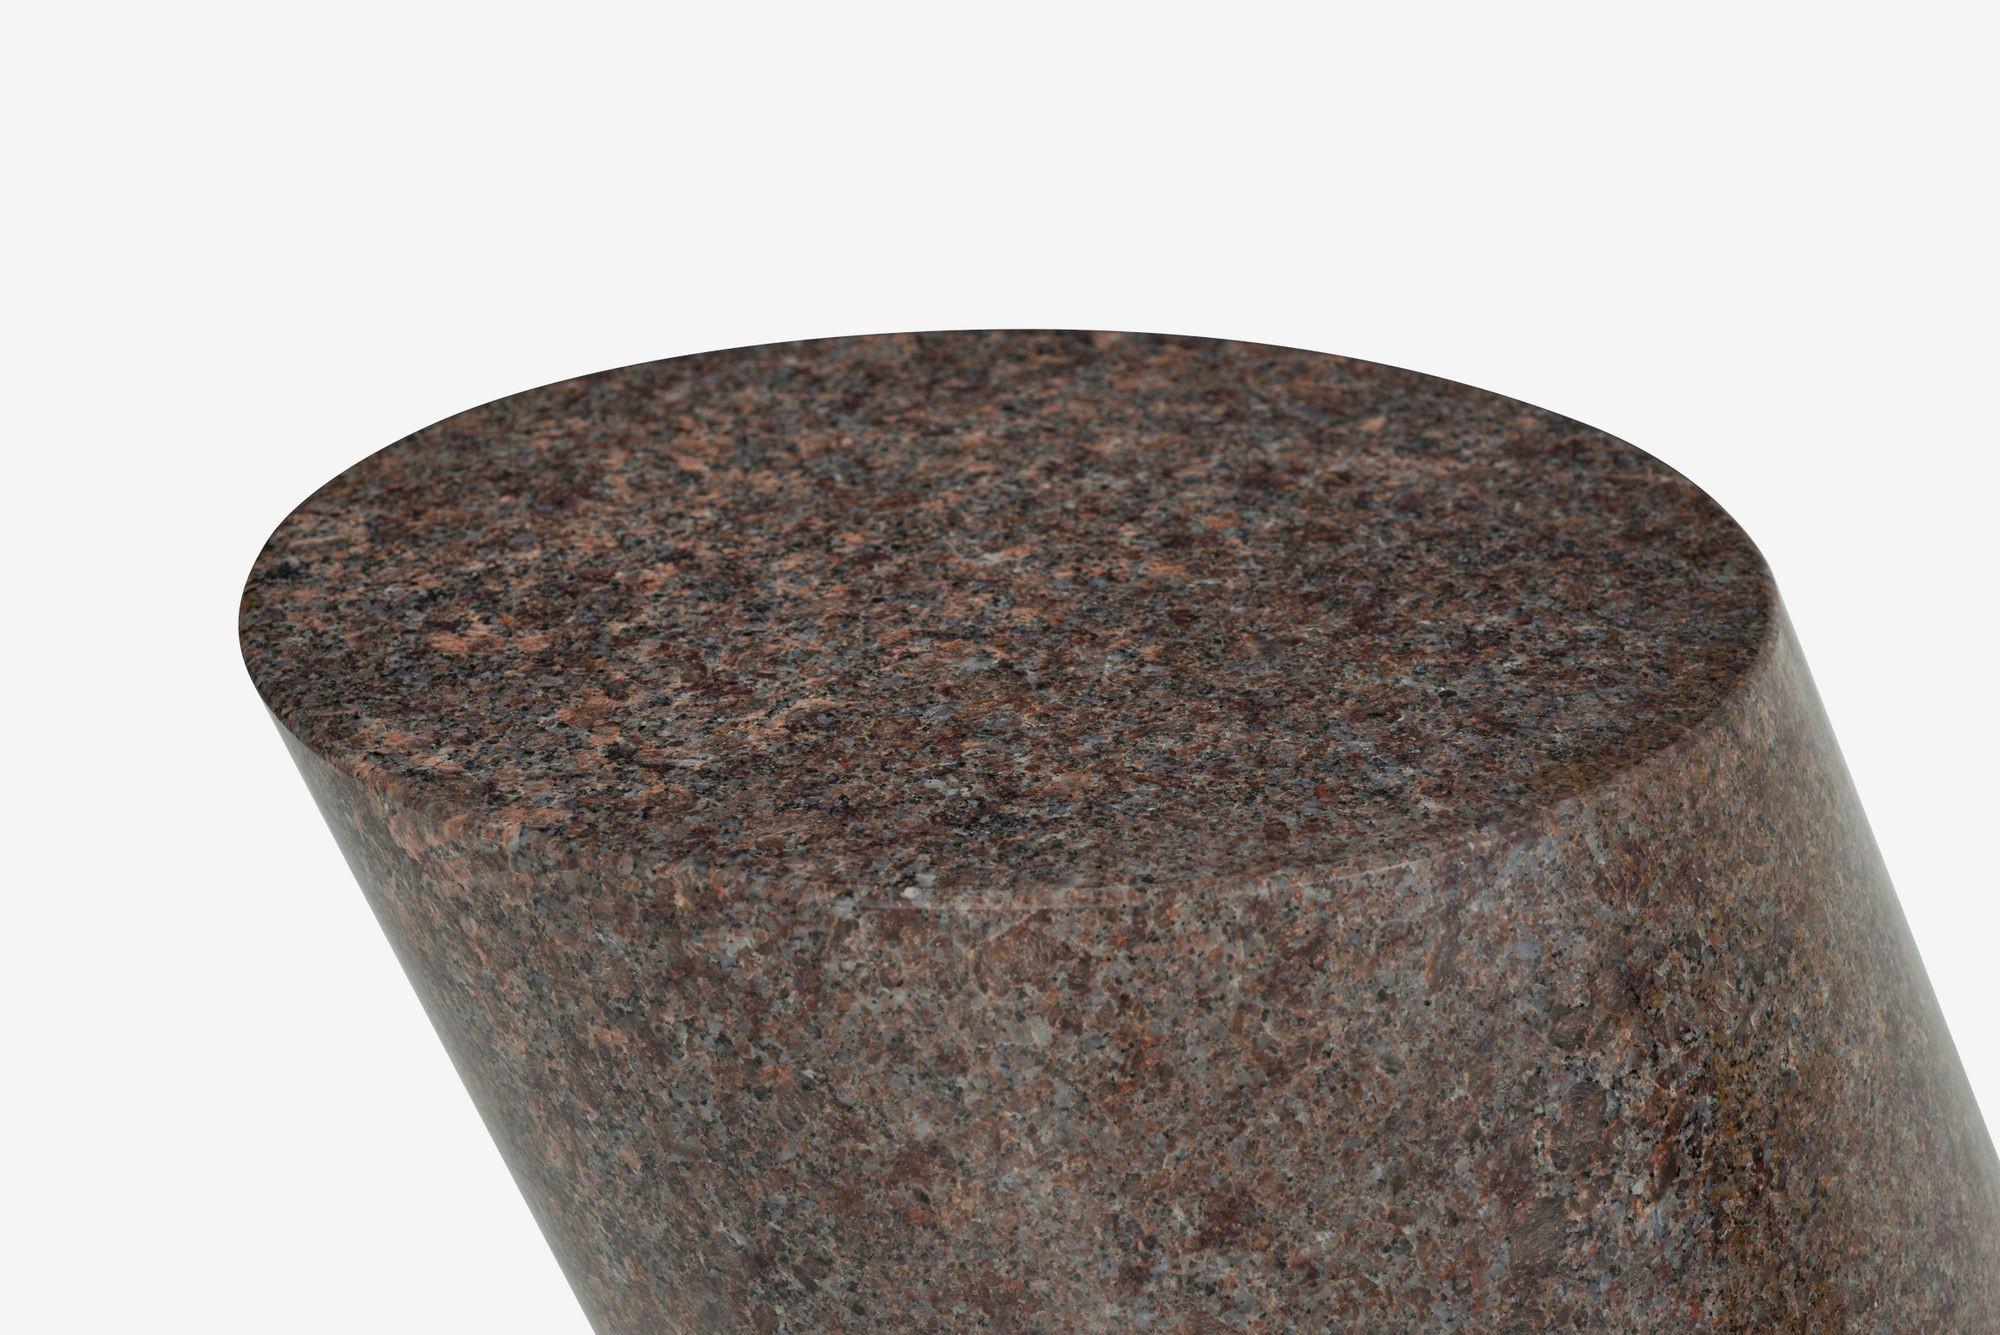 Late 20th Century Pair of Lucia Mercer End Tables for Knoll 1982 in Custom Sierra Brown Granite For Sale